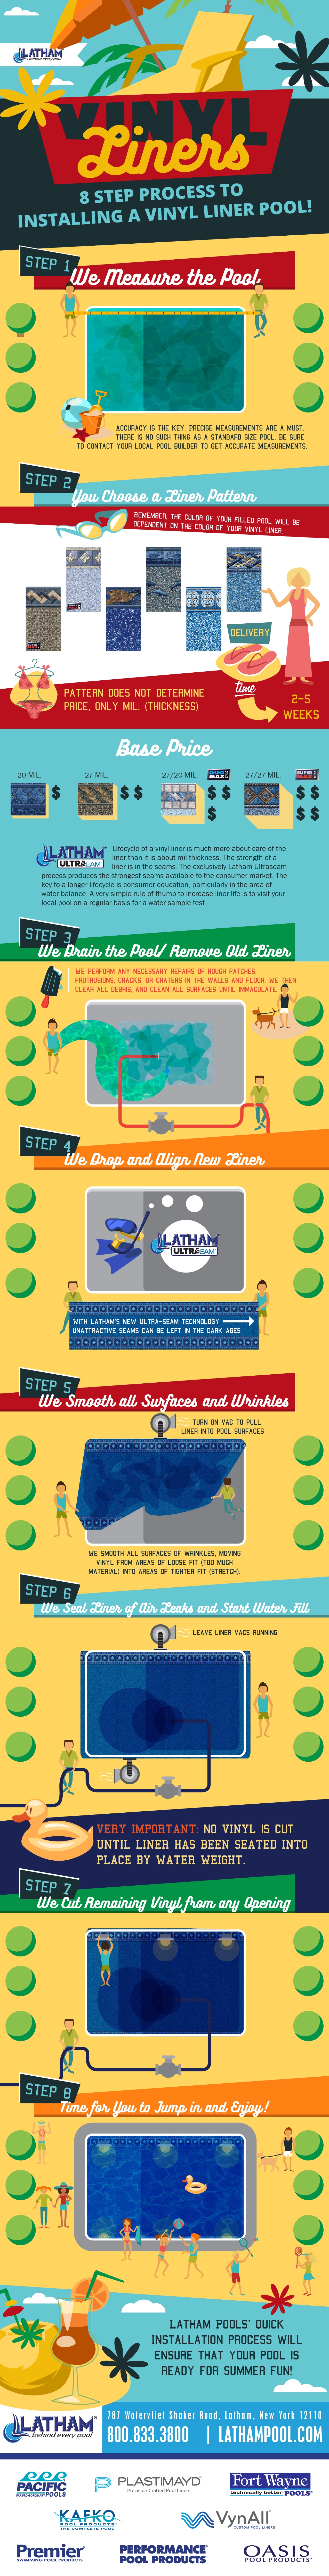 8 step process on Installing Vinyl Pool Liner Infographic